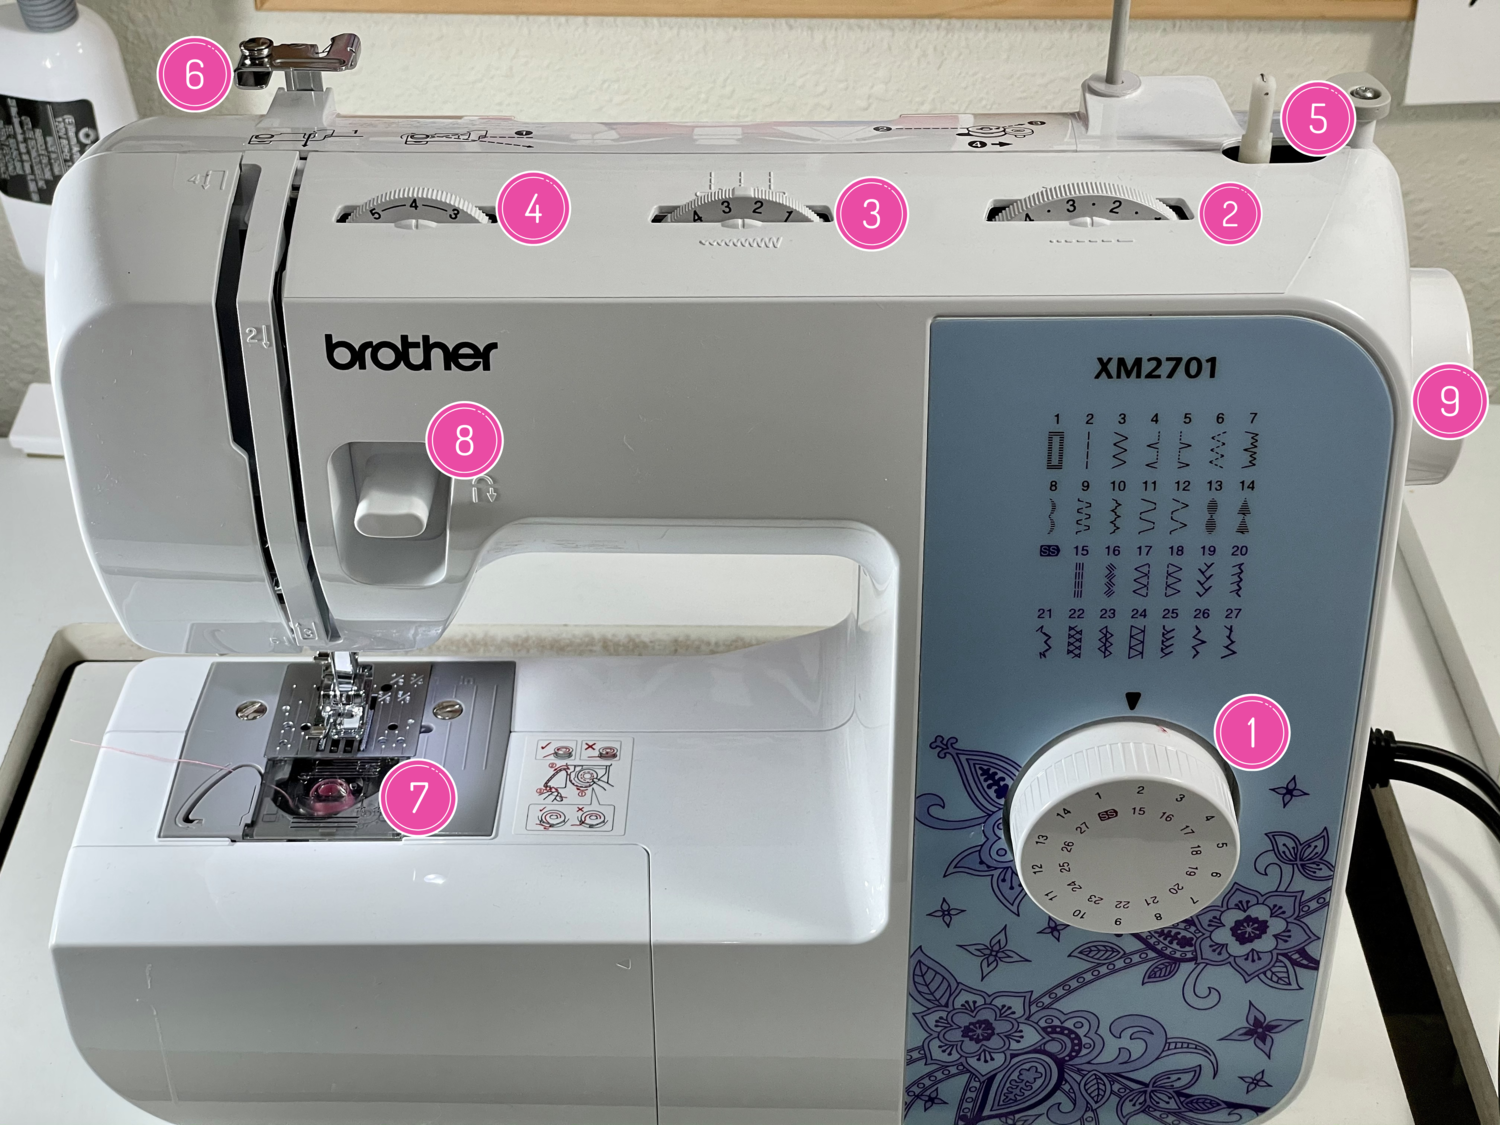 BEST 5 BROTHER SEWING MACHINES.pdf